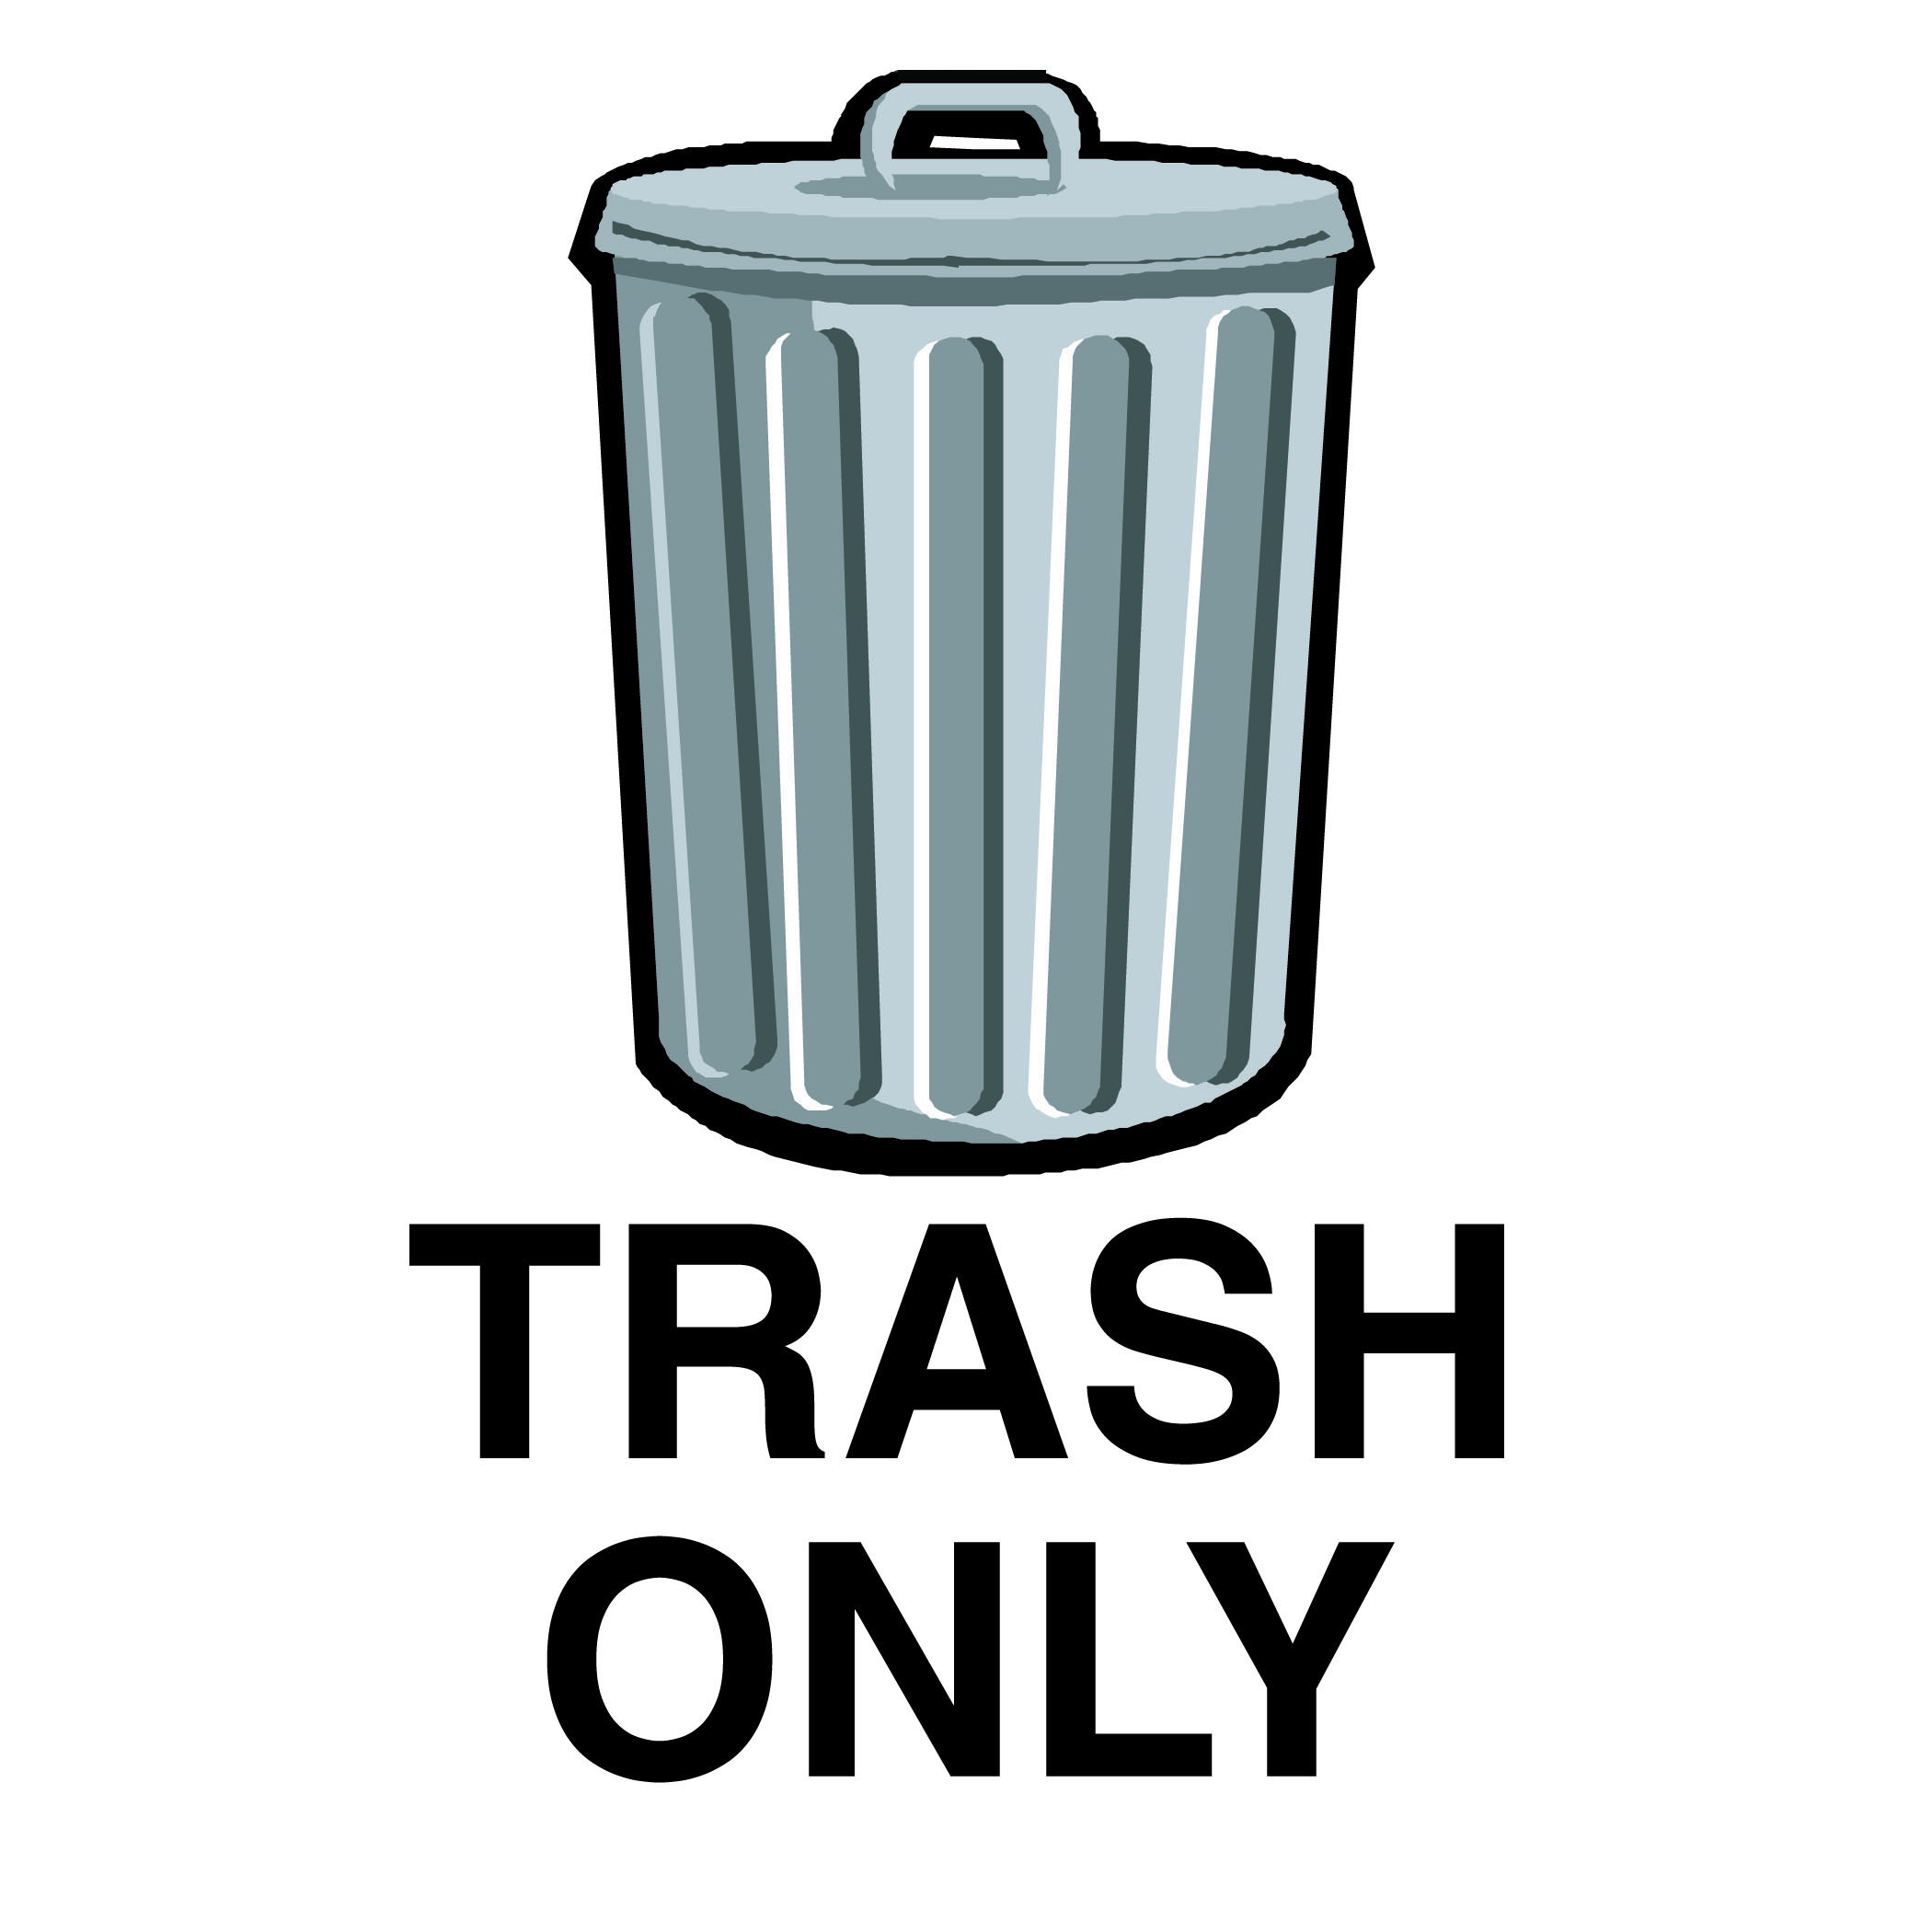 29 Trash Sign Free Cliparts That You Can Download To You Computer And